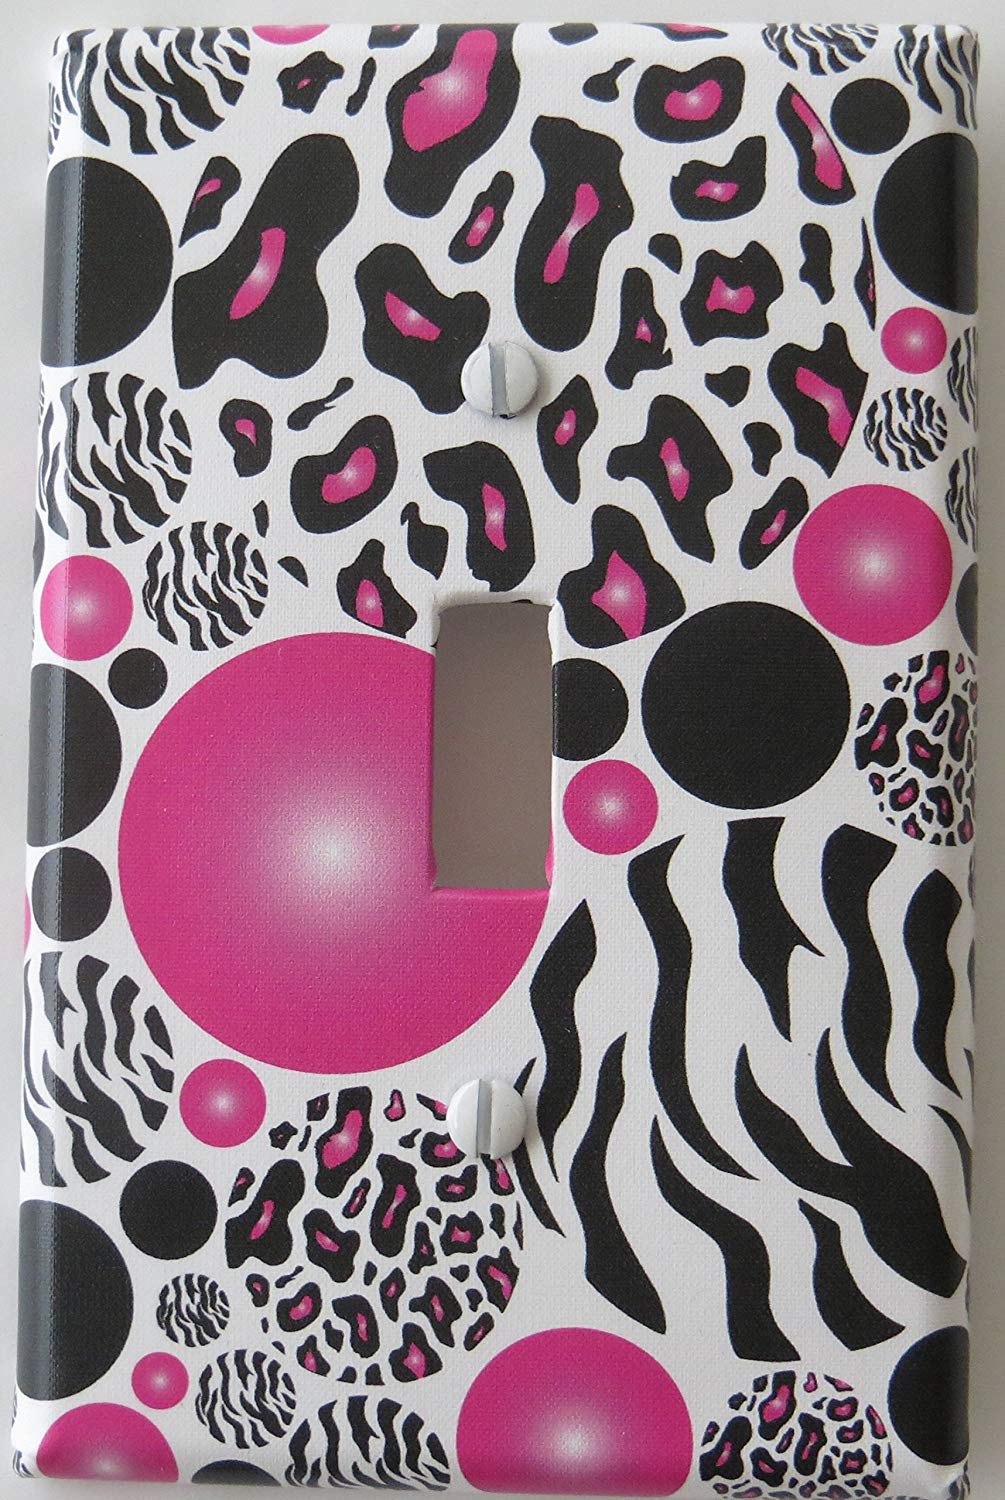 Leopard and Zebra Print Dots Light Switch Plate Covers in Hot Pink and Black